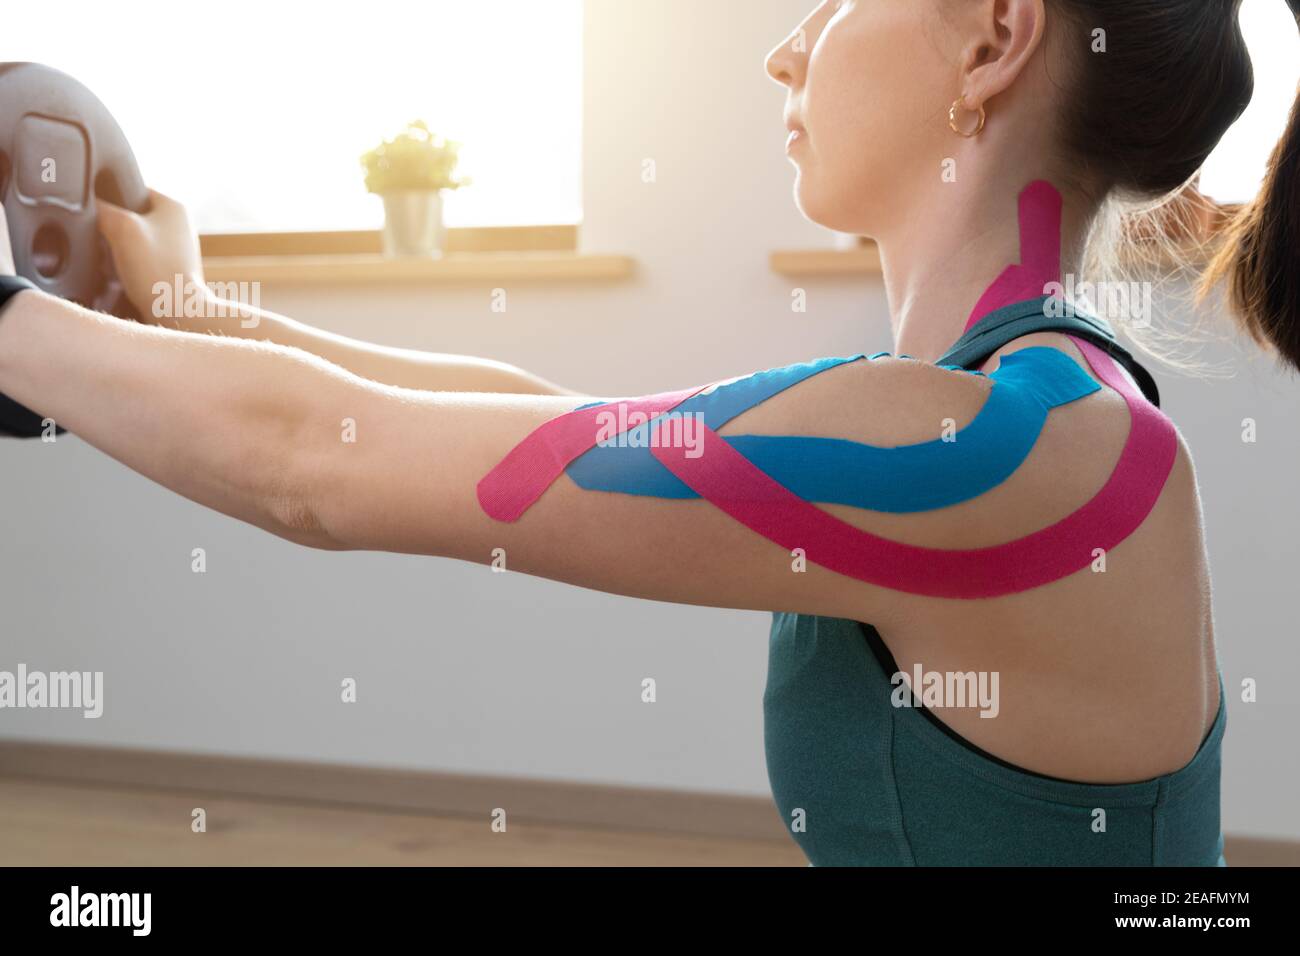 Young fit women performing excersise with elastic therapeutic kinetic tape on her shoulder on a sunny day at home. Kinesiology physical therapy. Stock Photo